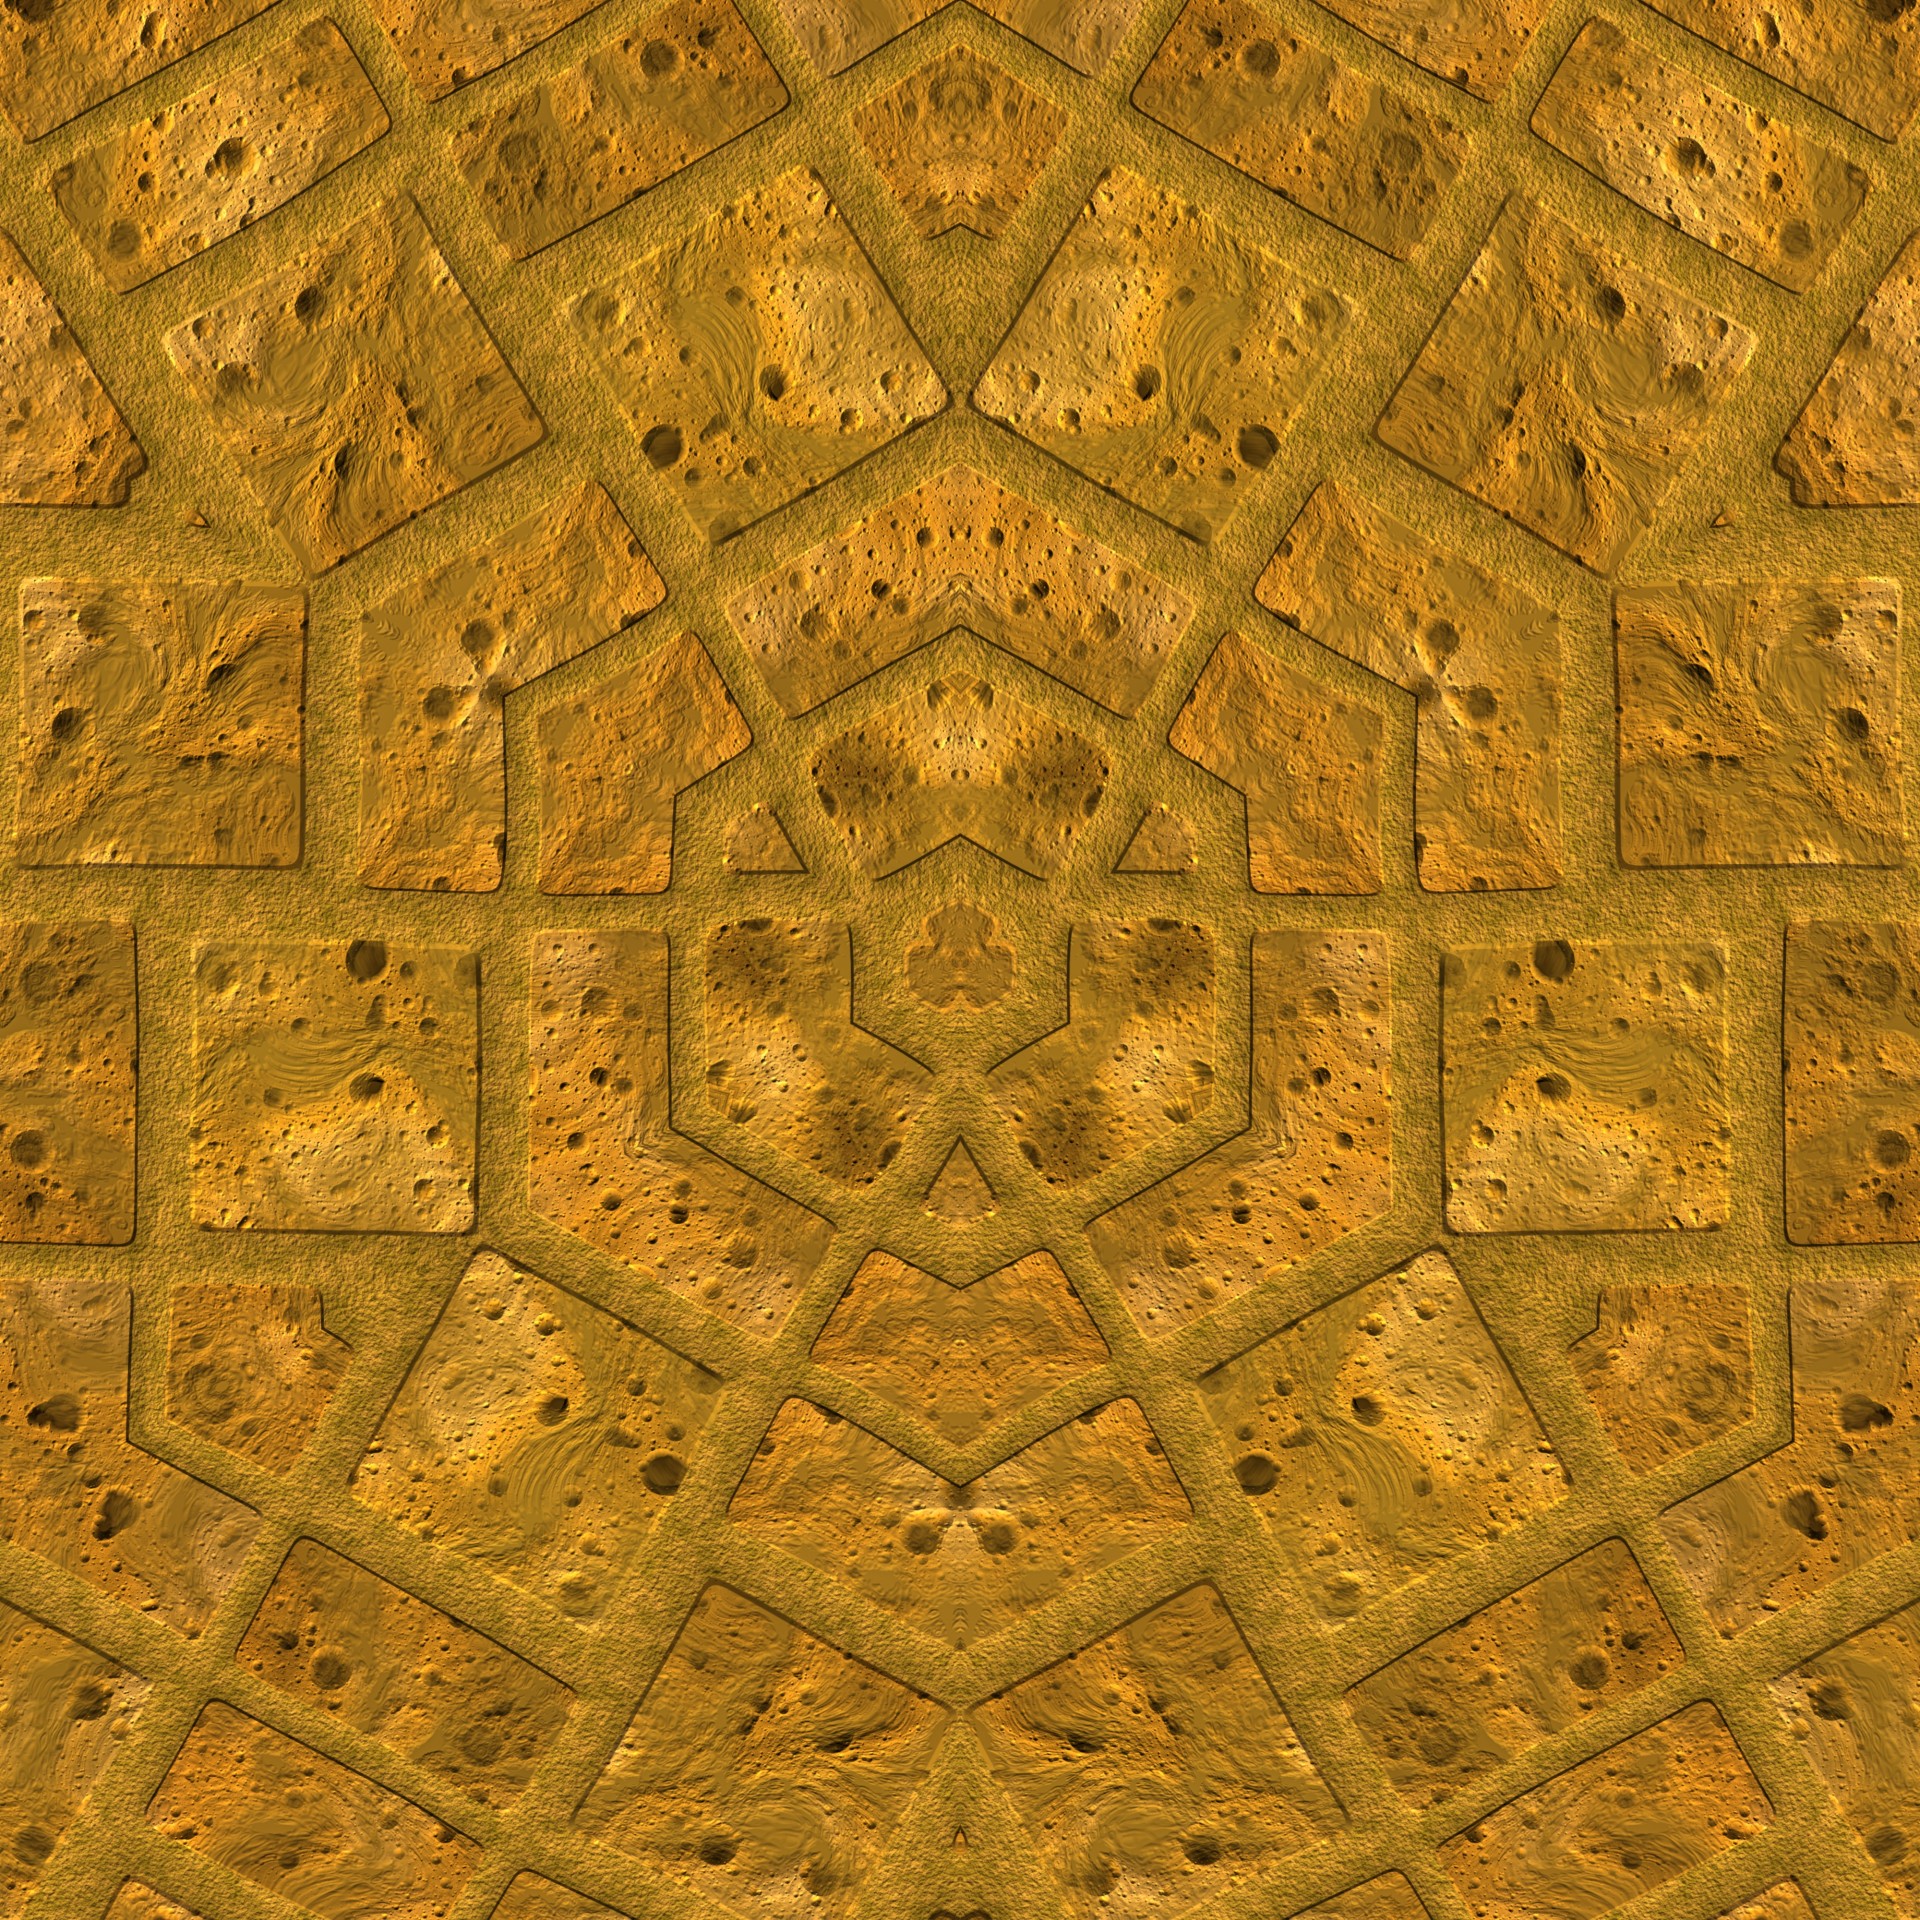 pitted bricks in square kaleidoscope